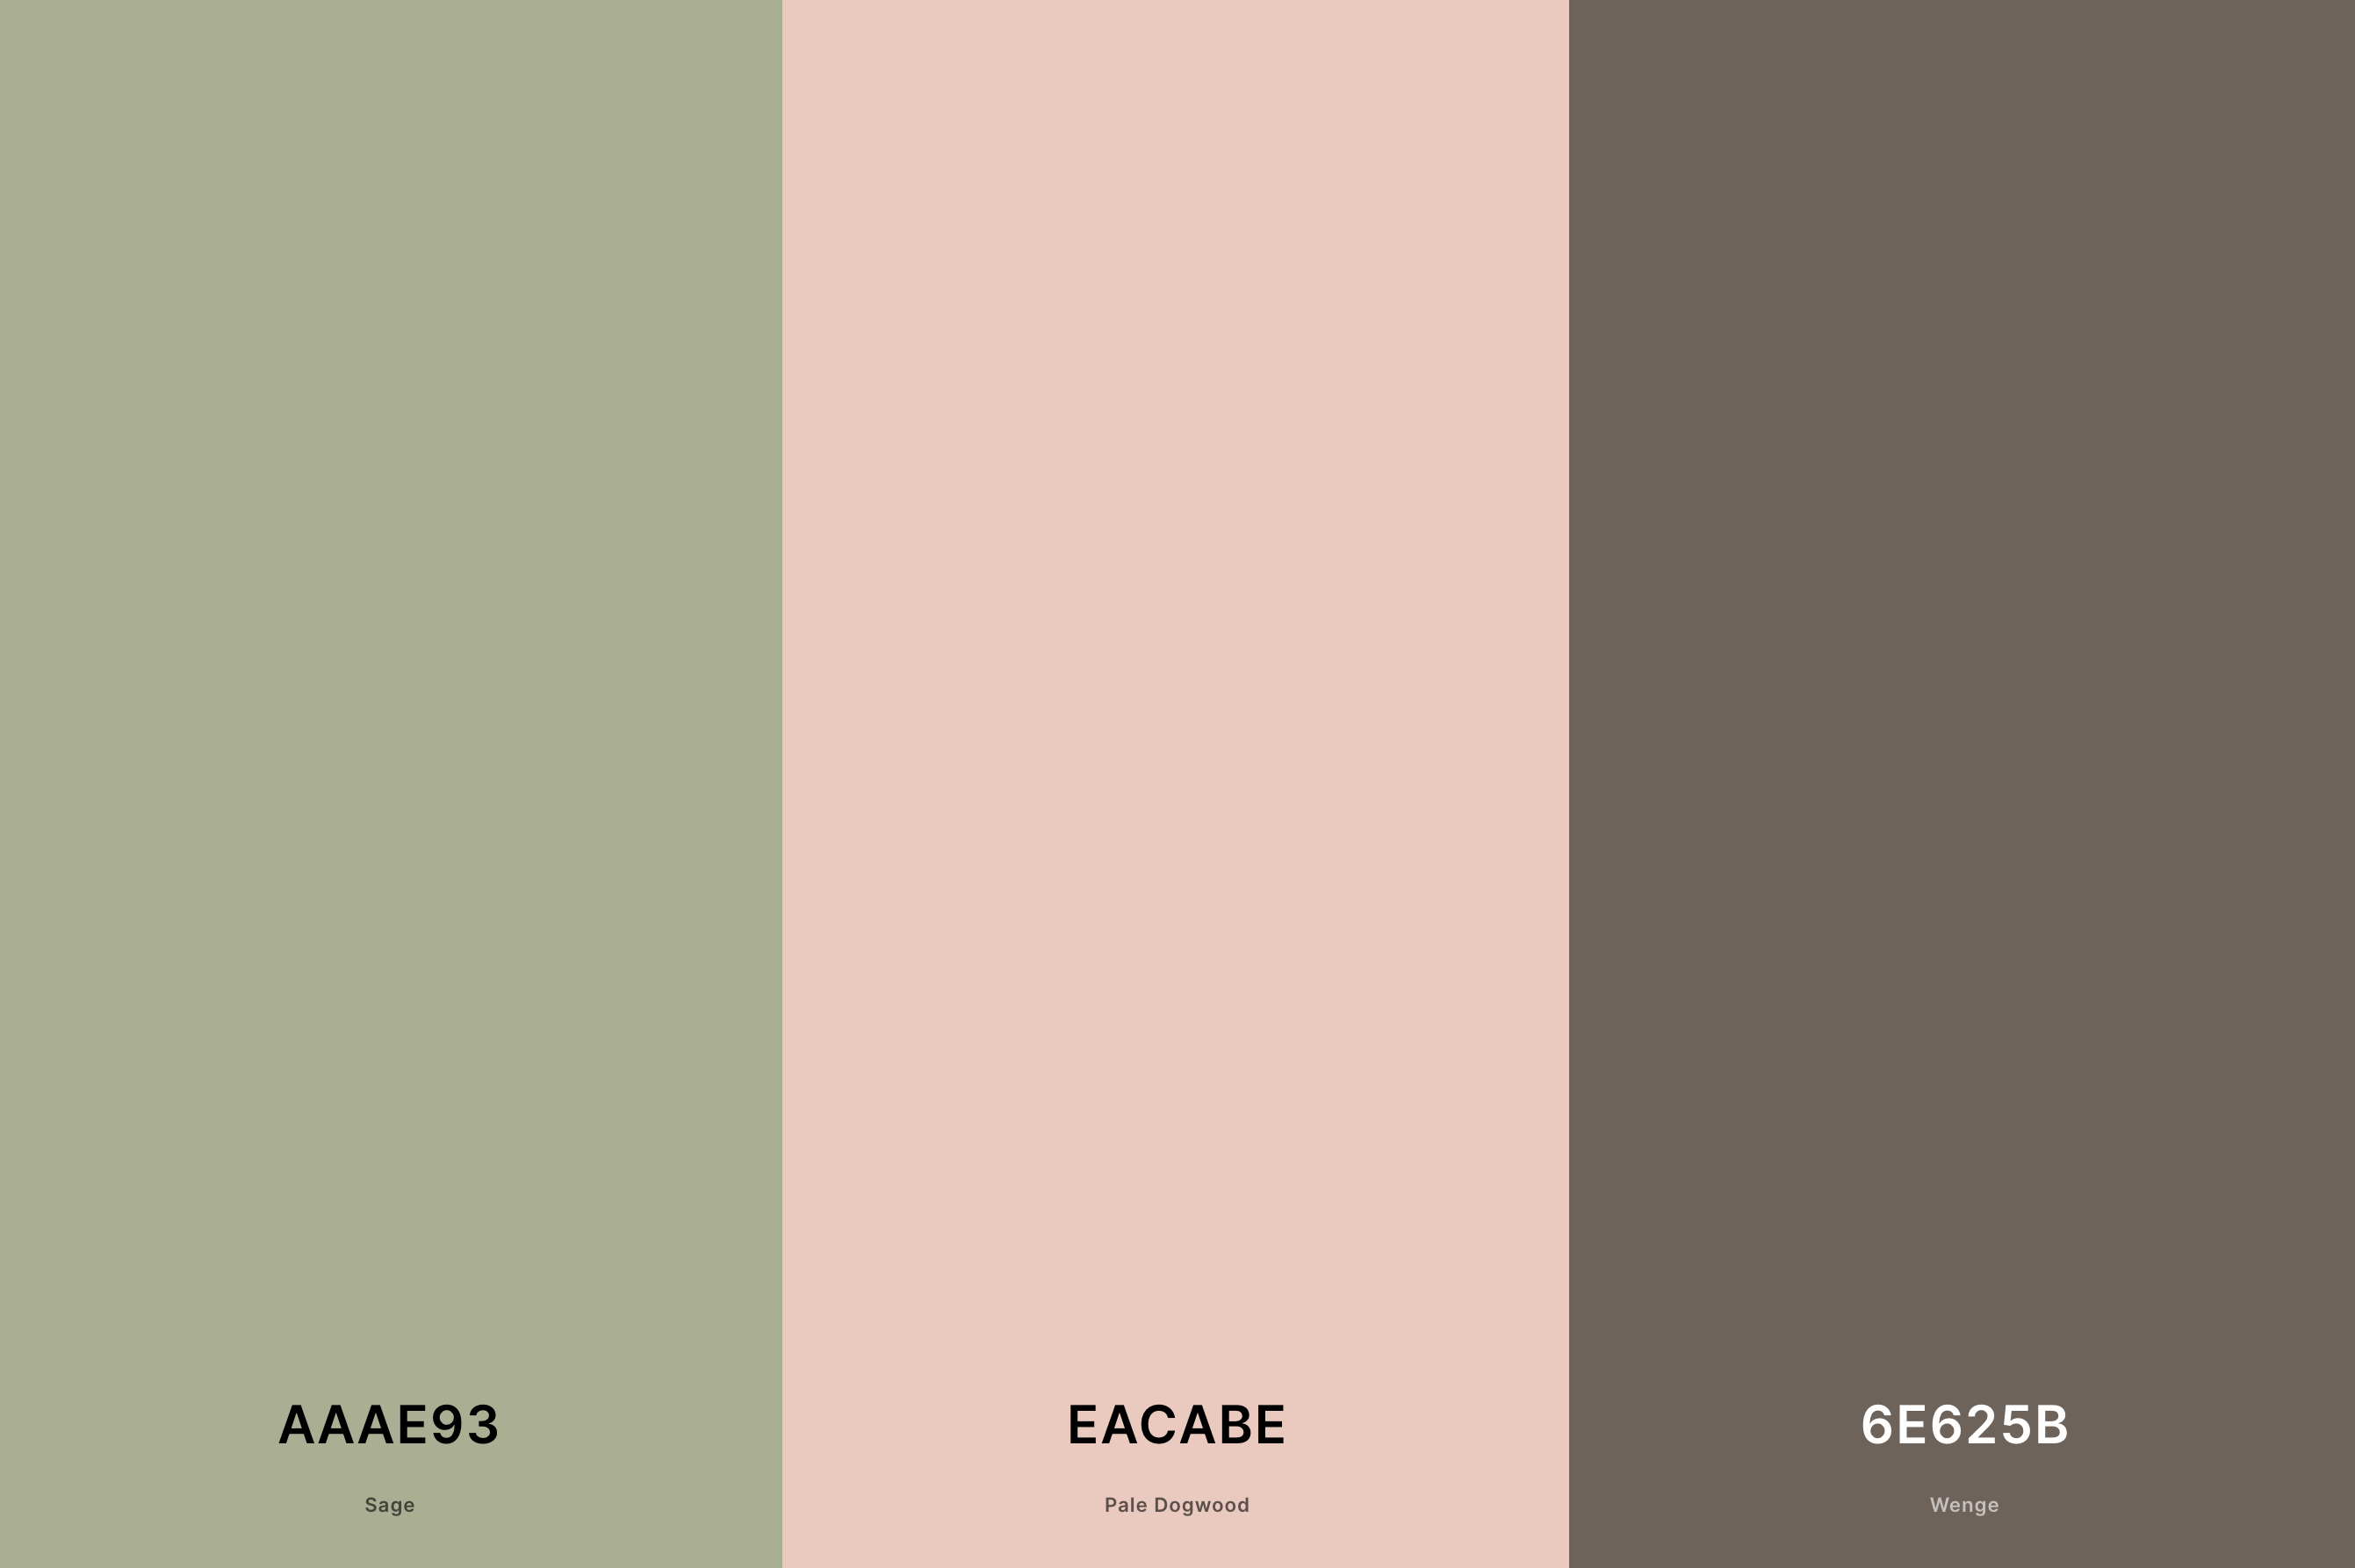 1. Sage Green and Dusty Rose Palette Color Palette with Sage (Hex #AAAE93) + Pale Dogwood (Hex #EACABE) + Wenge (Hex #6E625B) with Hex Codes